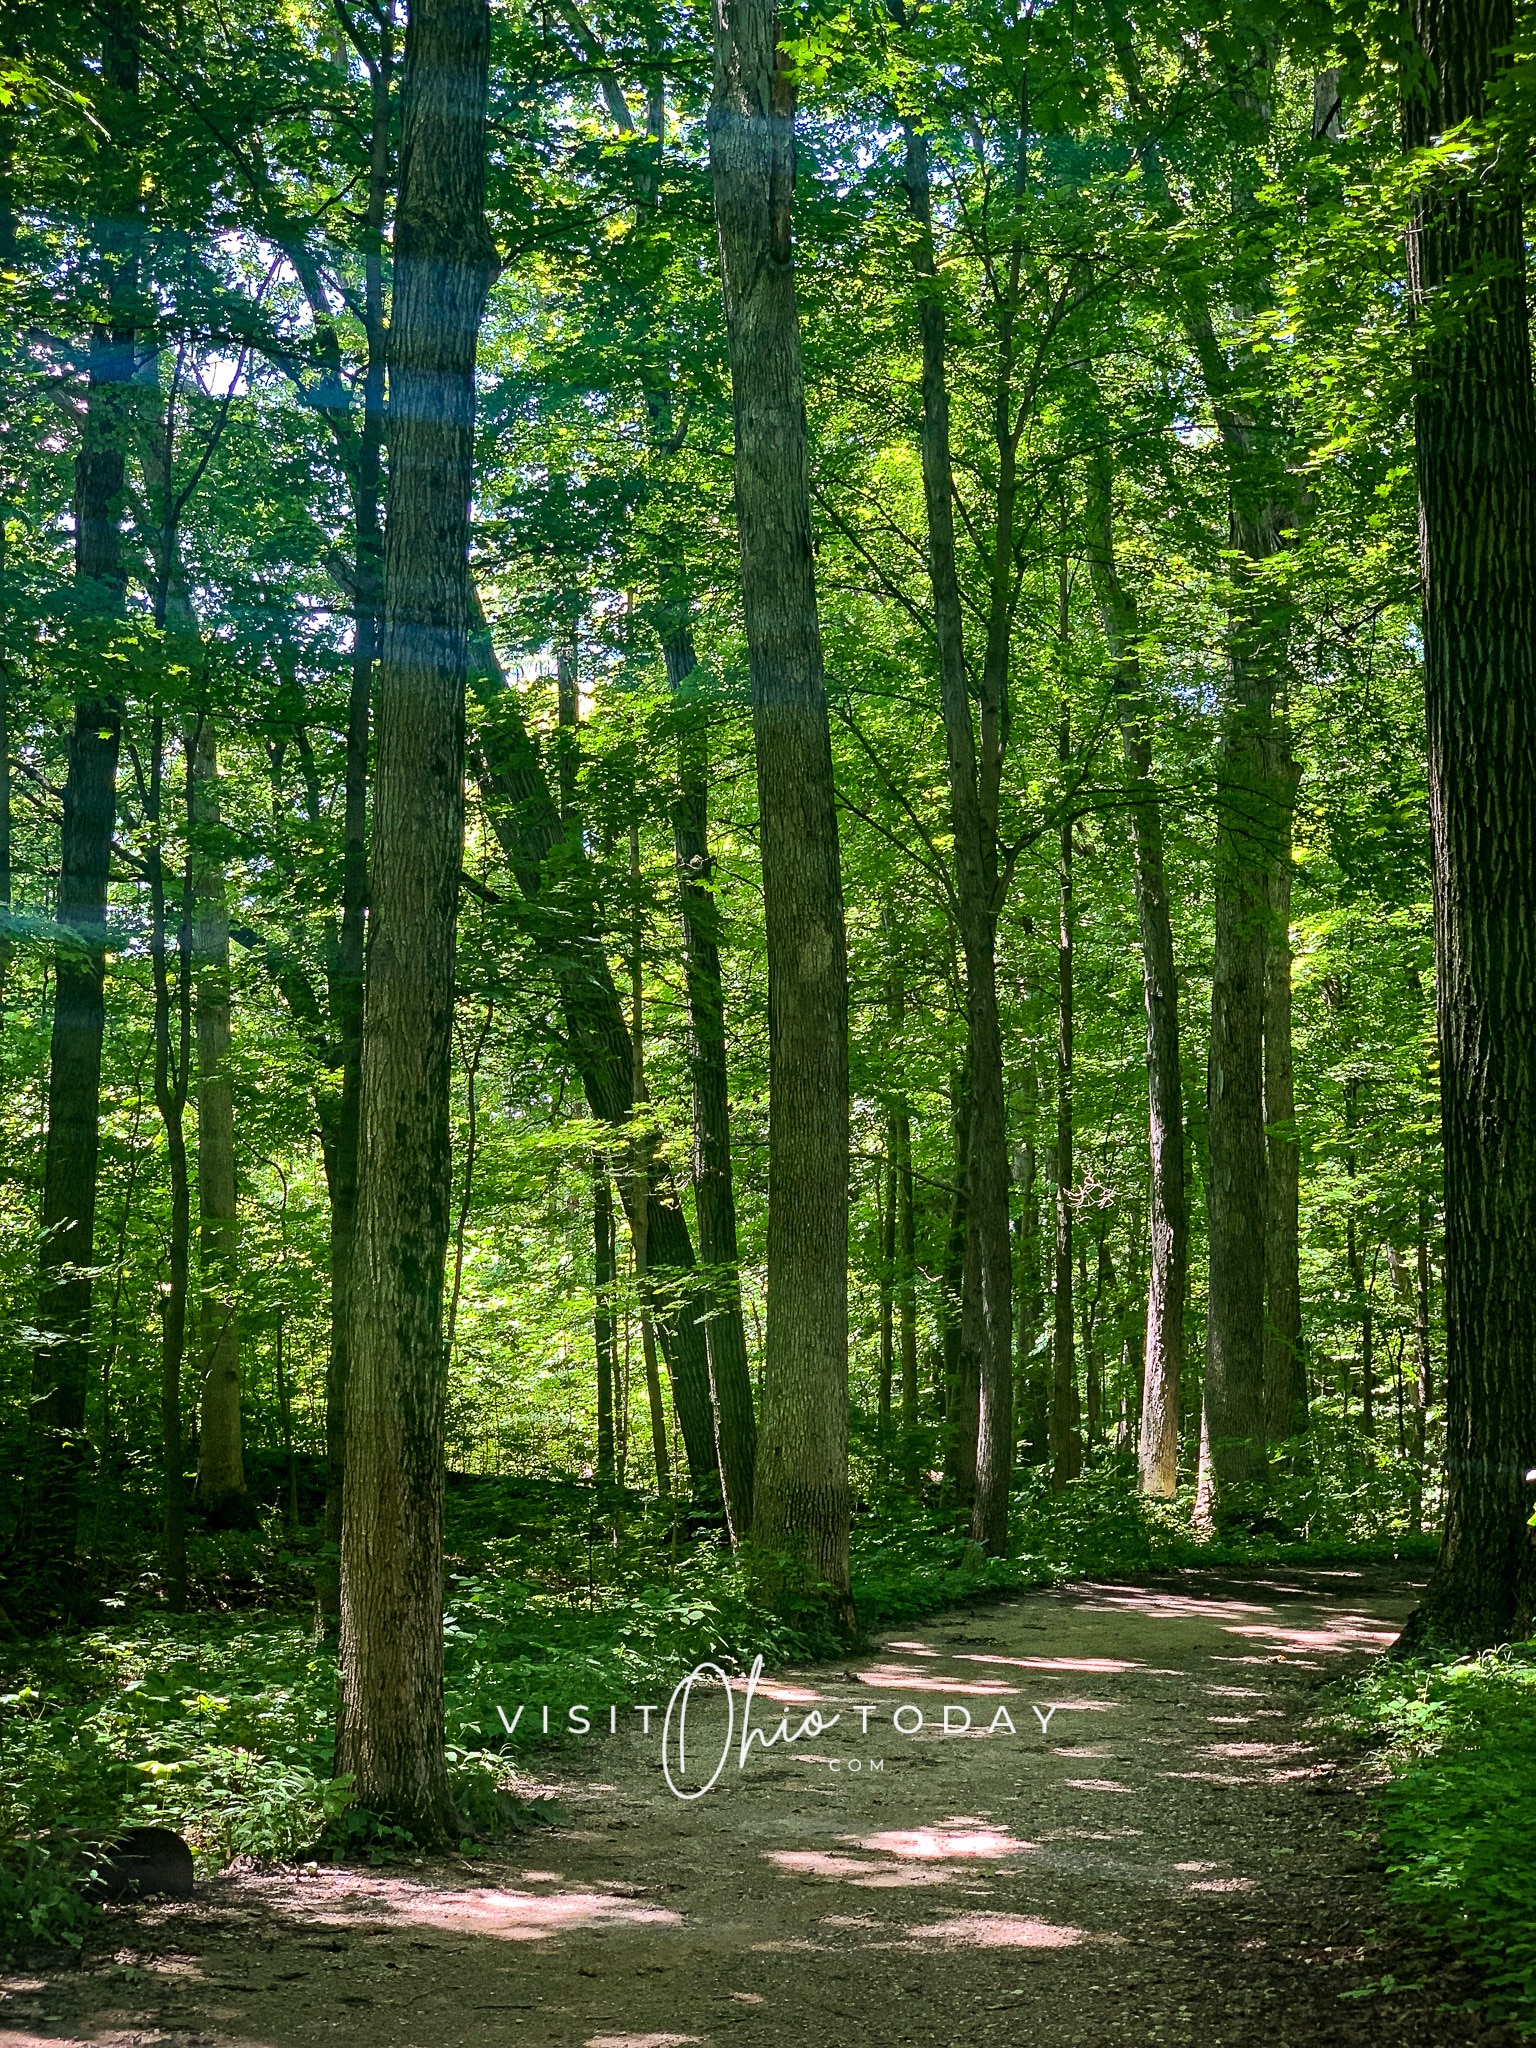 vertical photo showing a trail path through trees, with the sun creating a dappled pattern on the ground